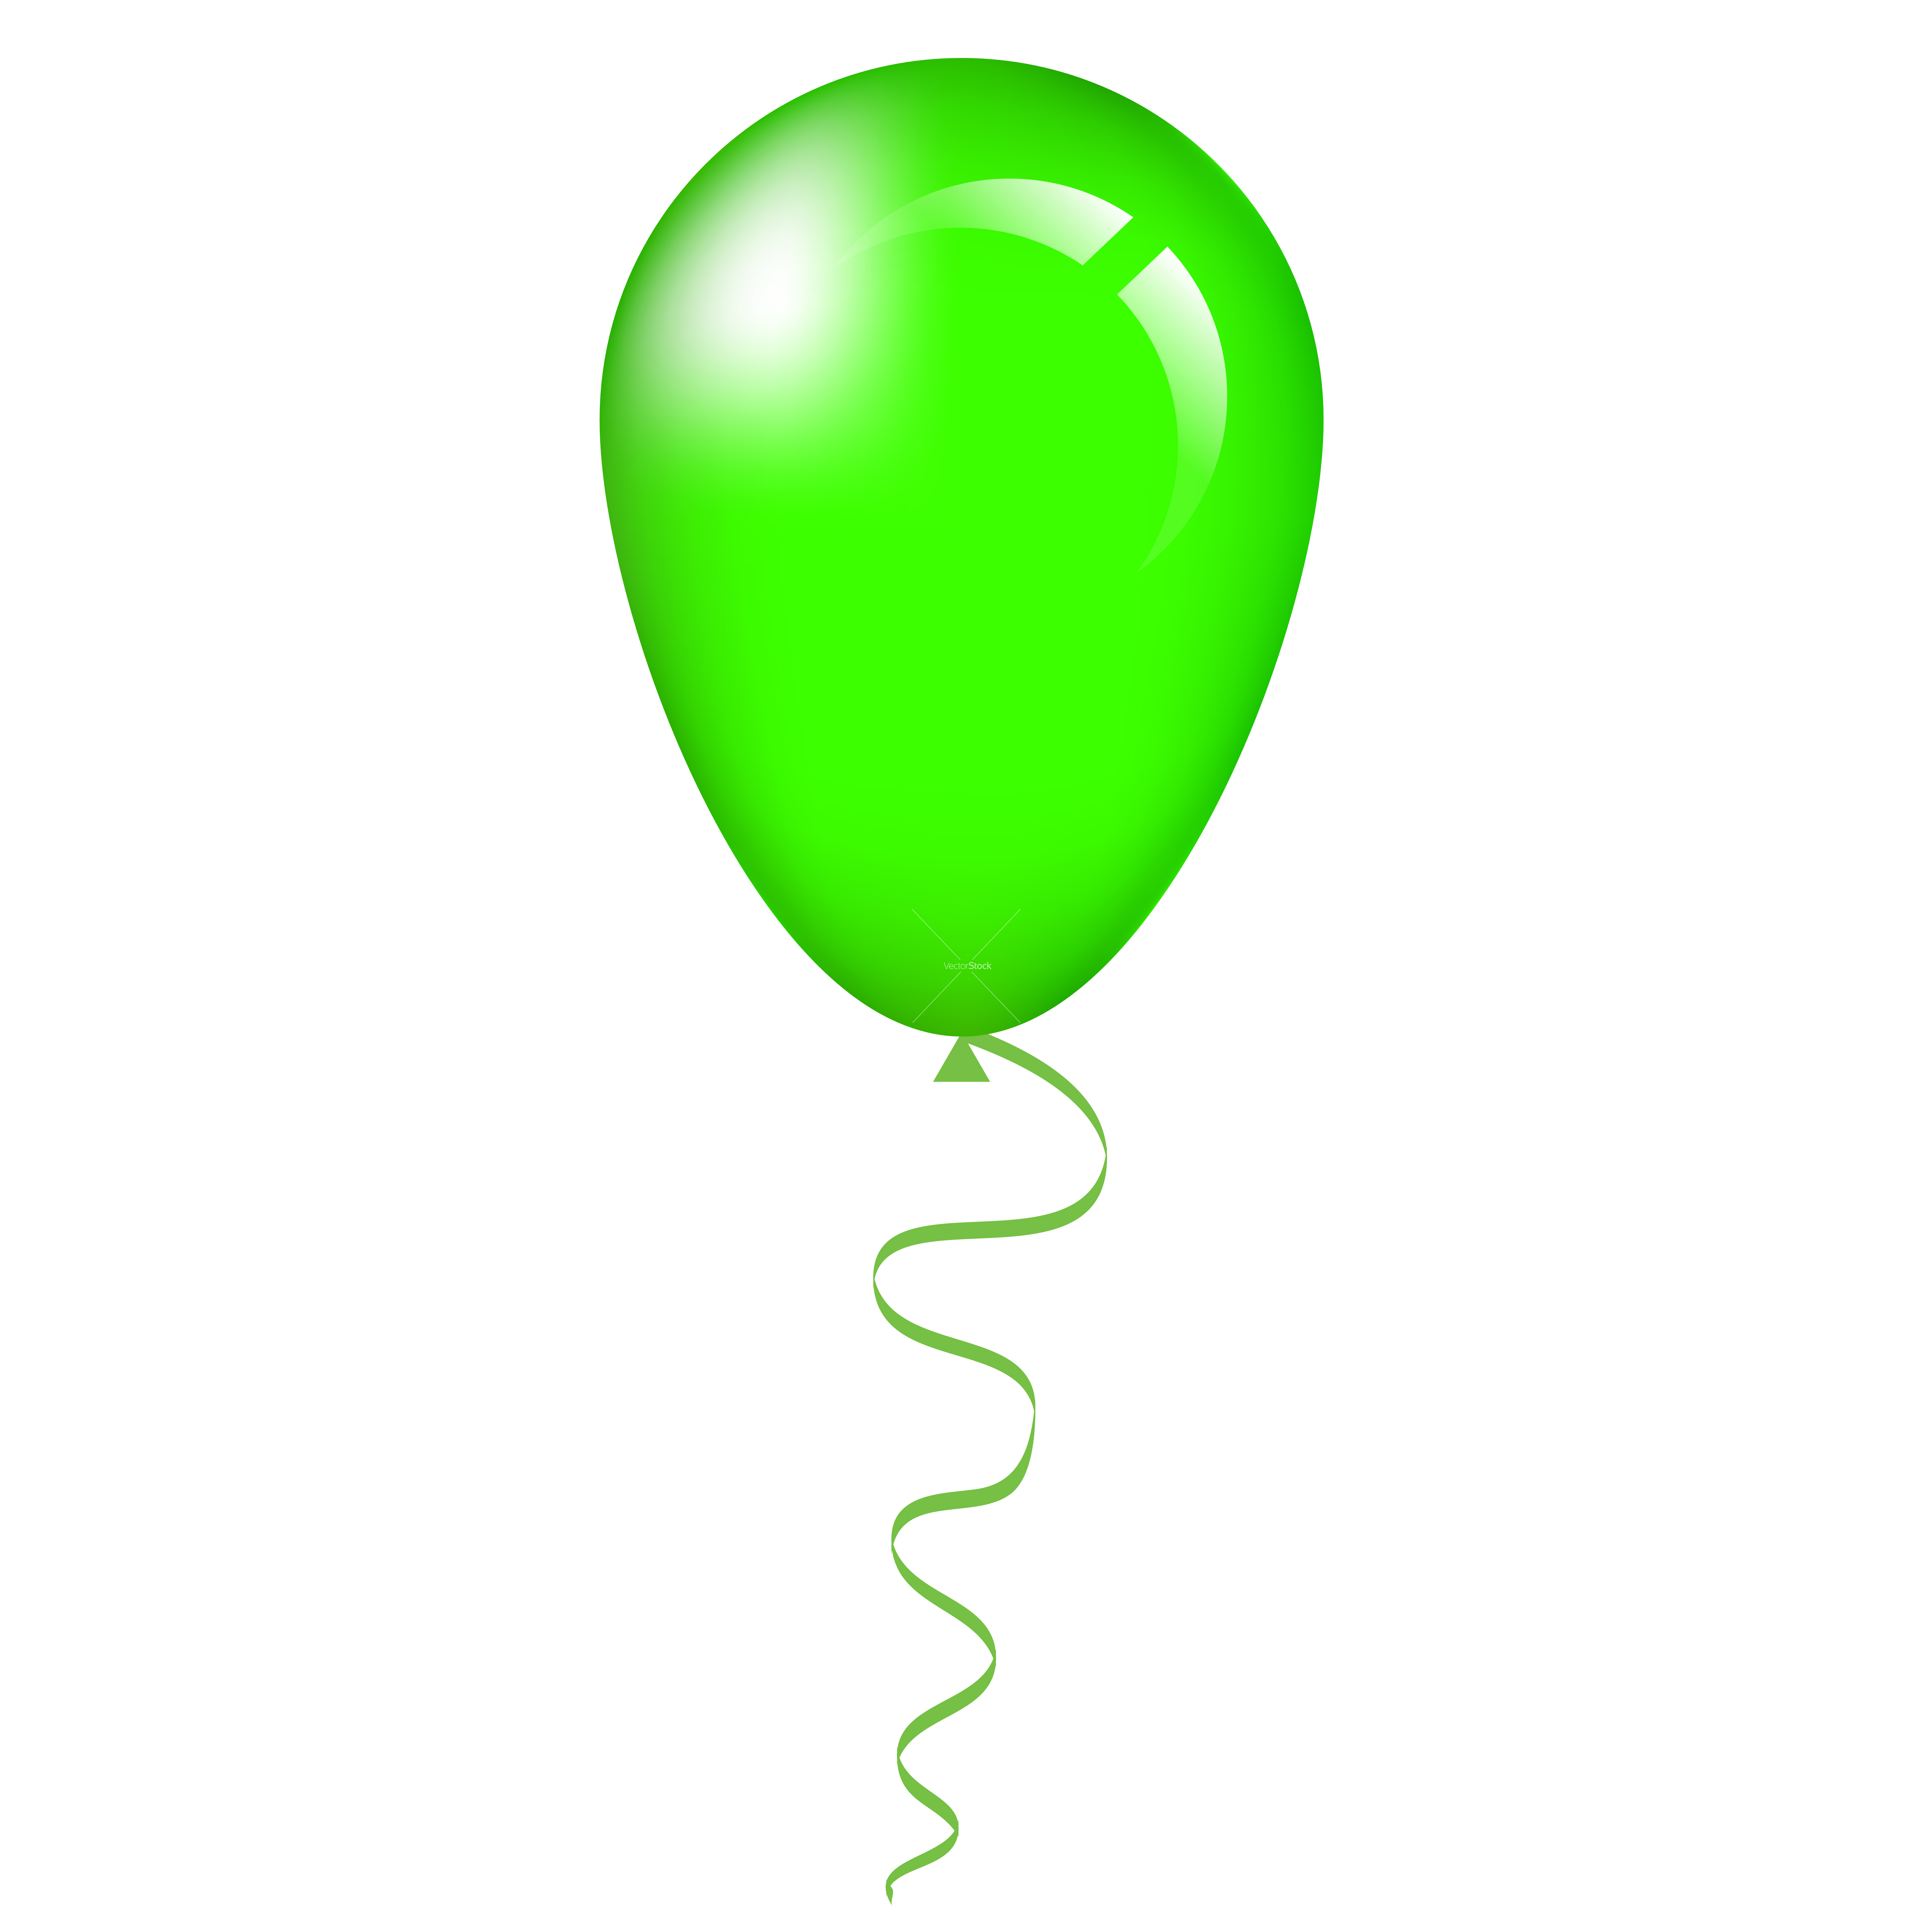 Green Balloon Clipart | Clipart Panda - Free Clipart Images